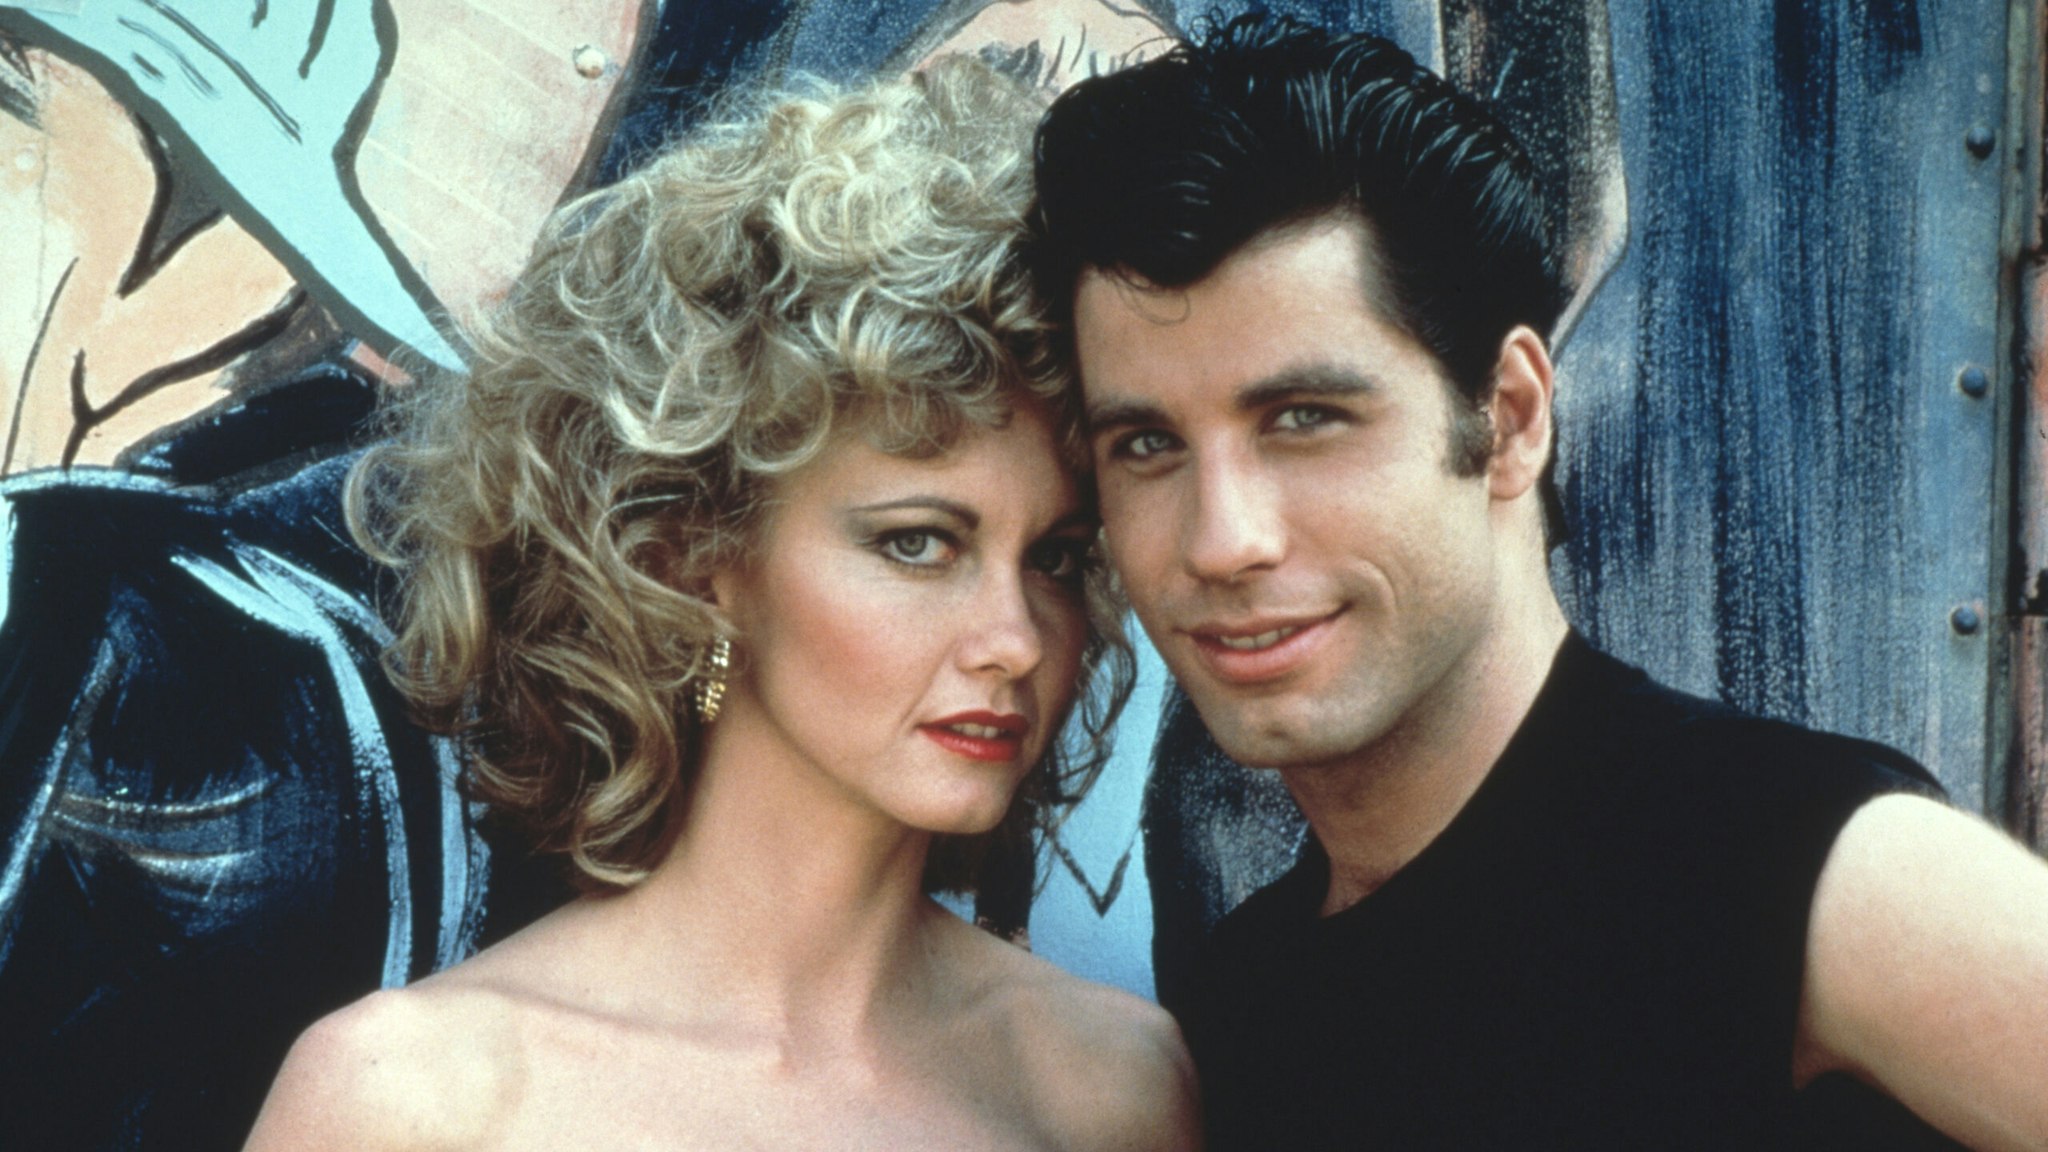 Australian singer and actress Olivia Newton-John and American actor John Travolta as they appear in the Paramount film 'Grease', 1978.